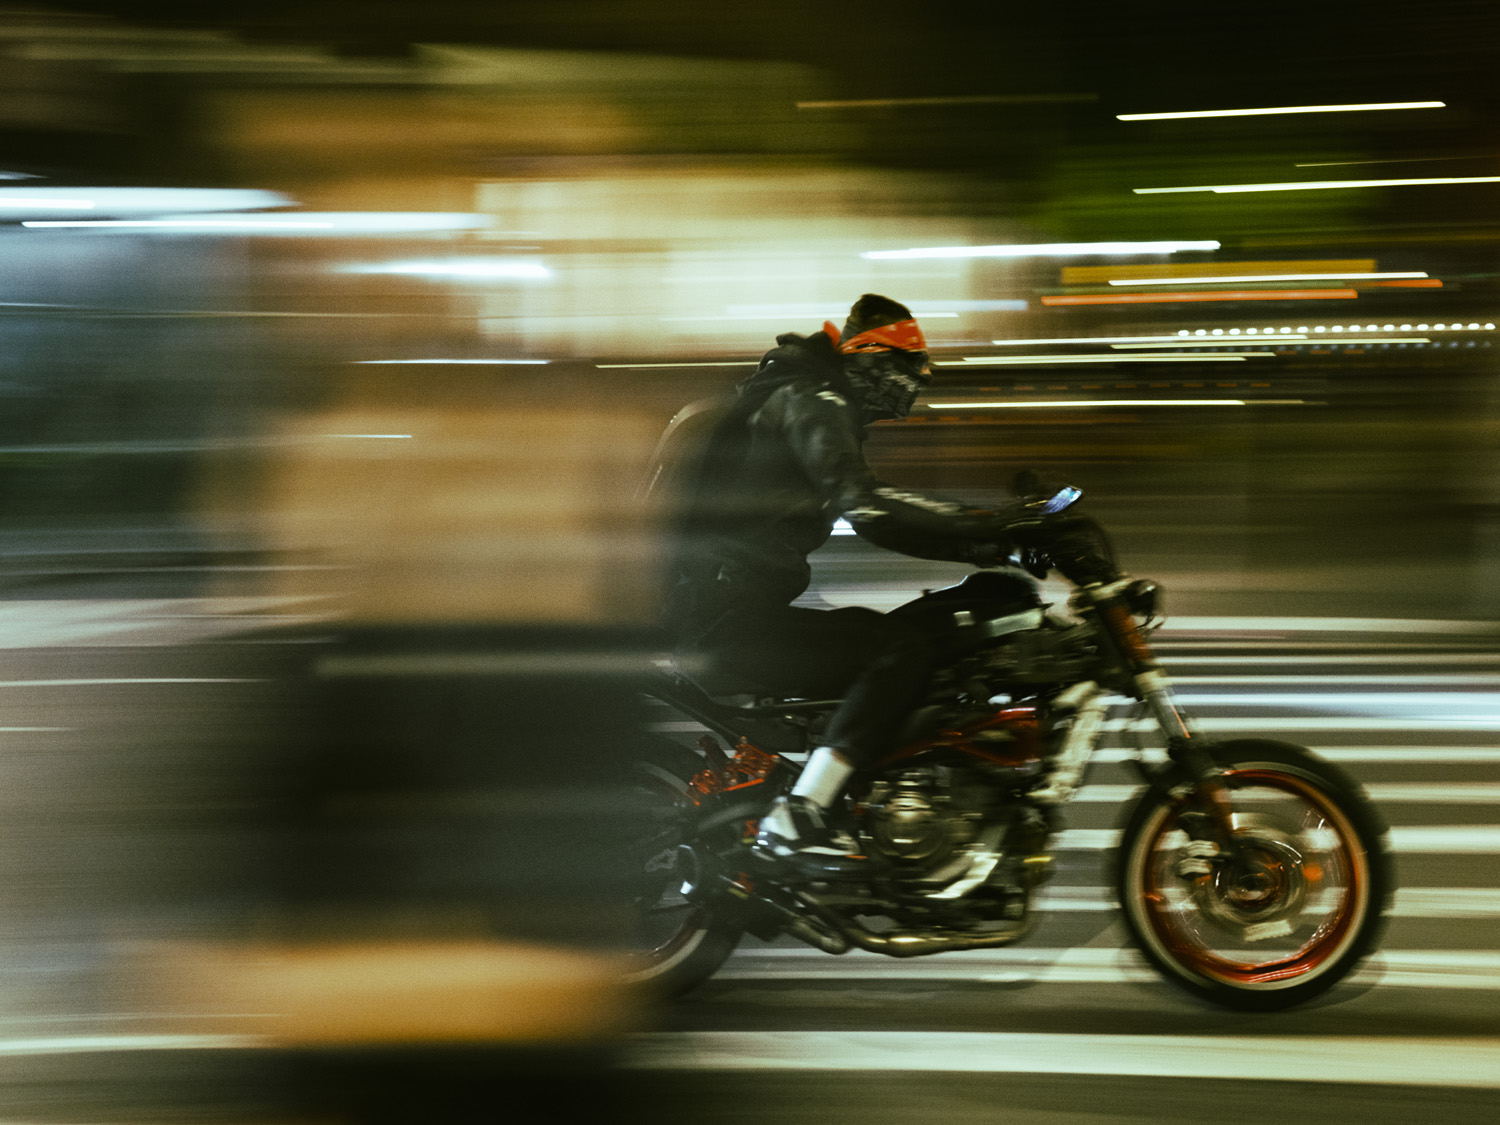 motorcyclist moving through city street at night creating motion blur